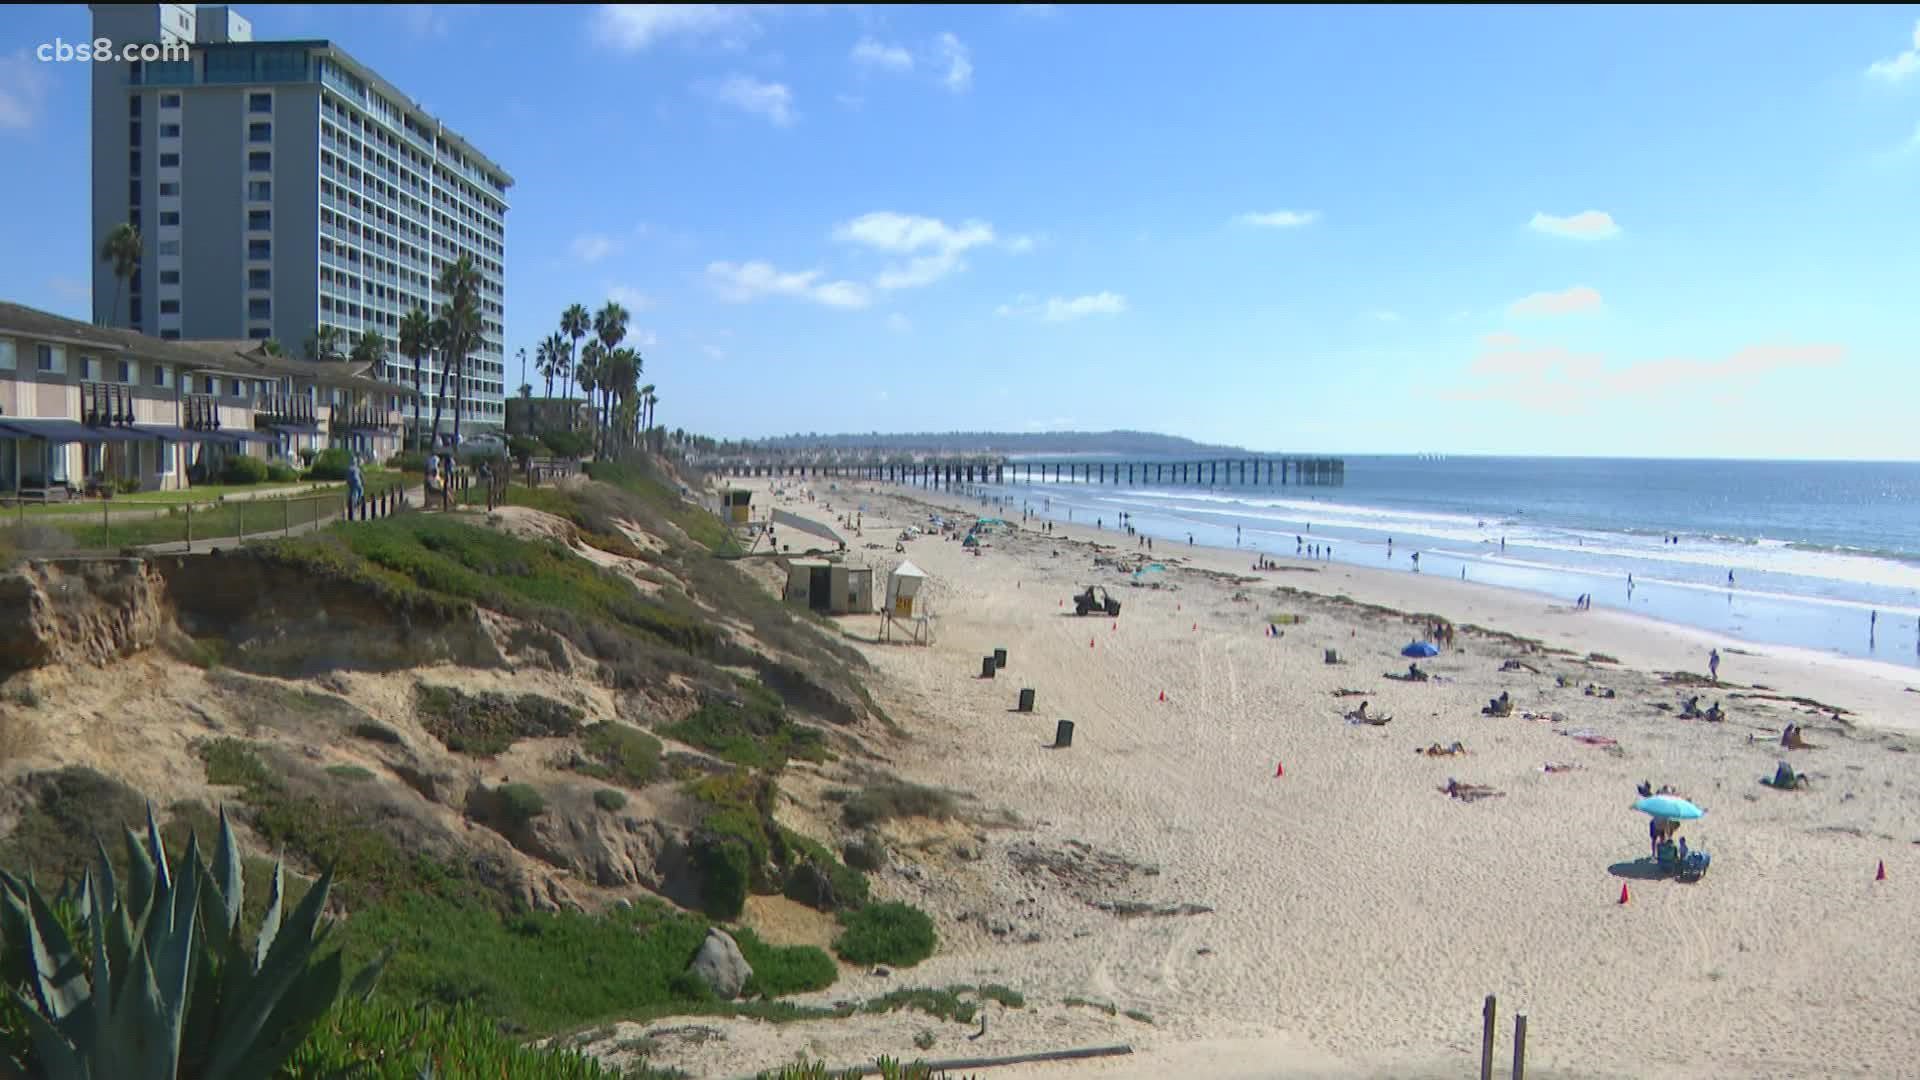 News 8 looks into the history of Pacific Beach, and what it's like today. We revisit Crystal Pier, life along the boardwalk and more featured in 1987.